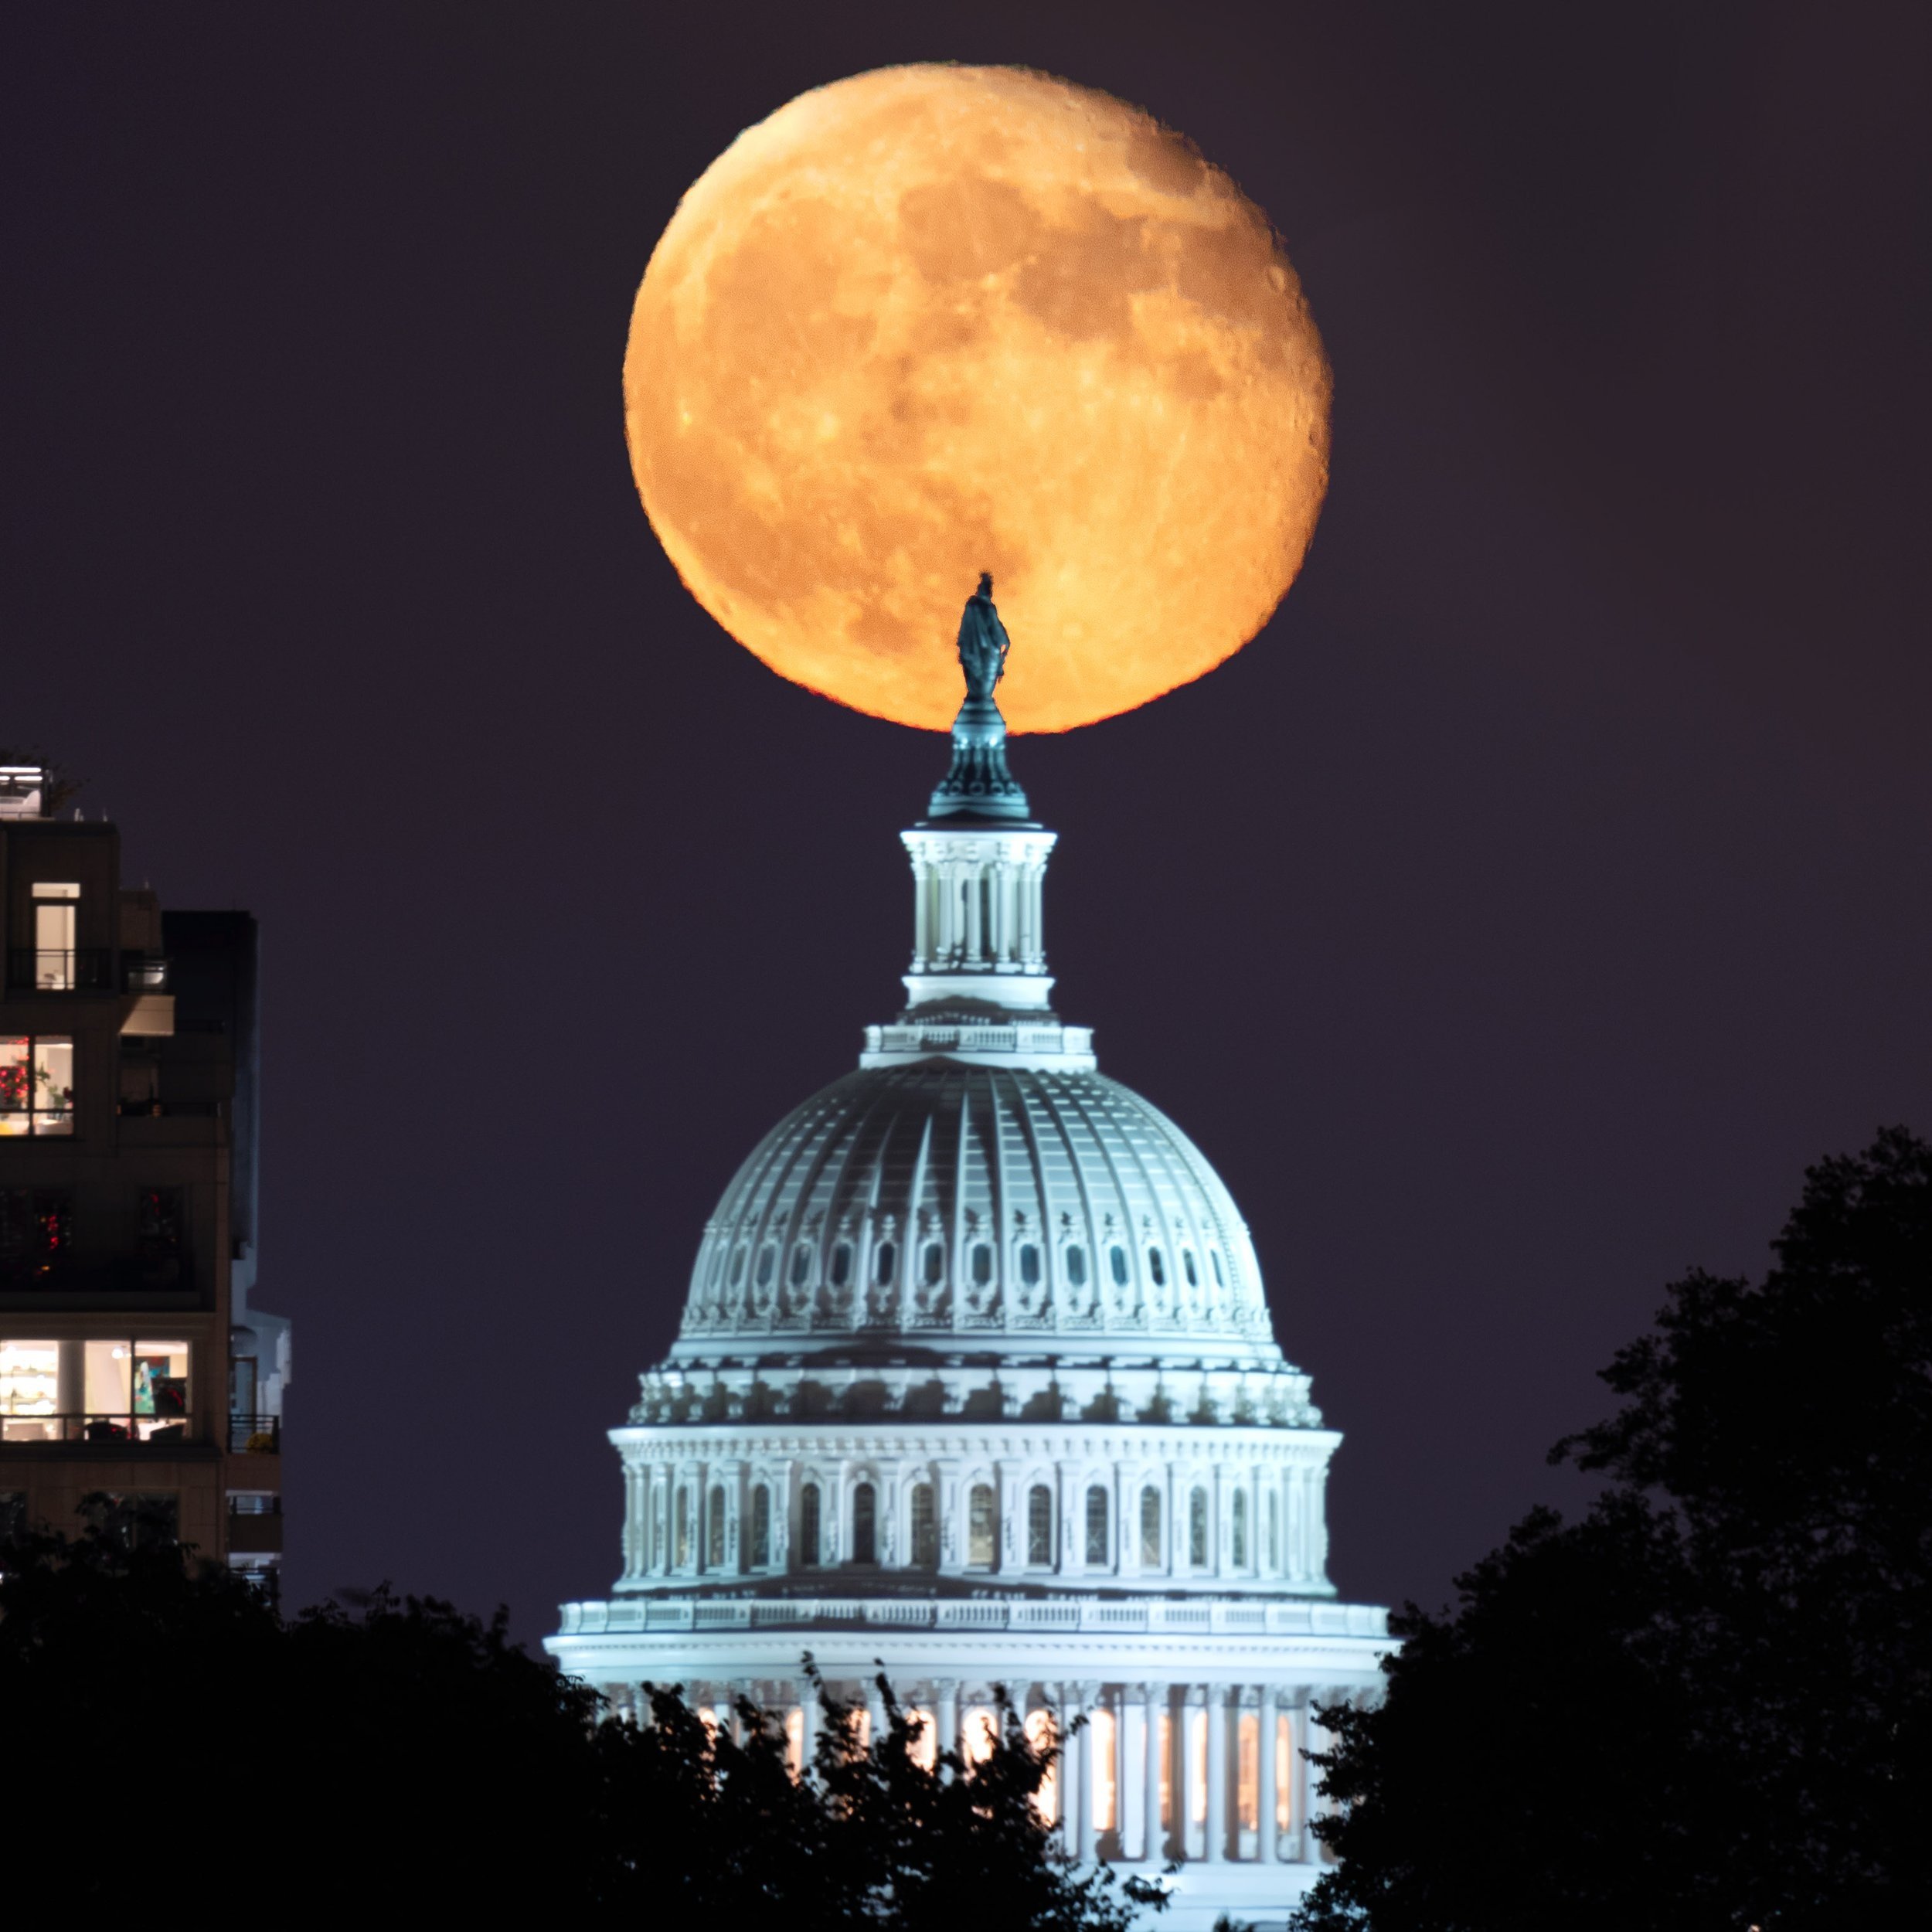 Waning Gibbous moon raises behind the Statue of Freedom atop the US Capitol building